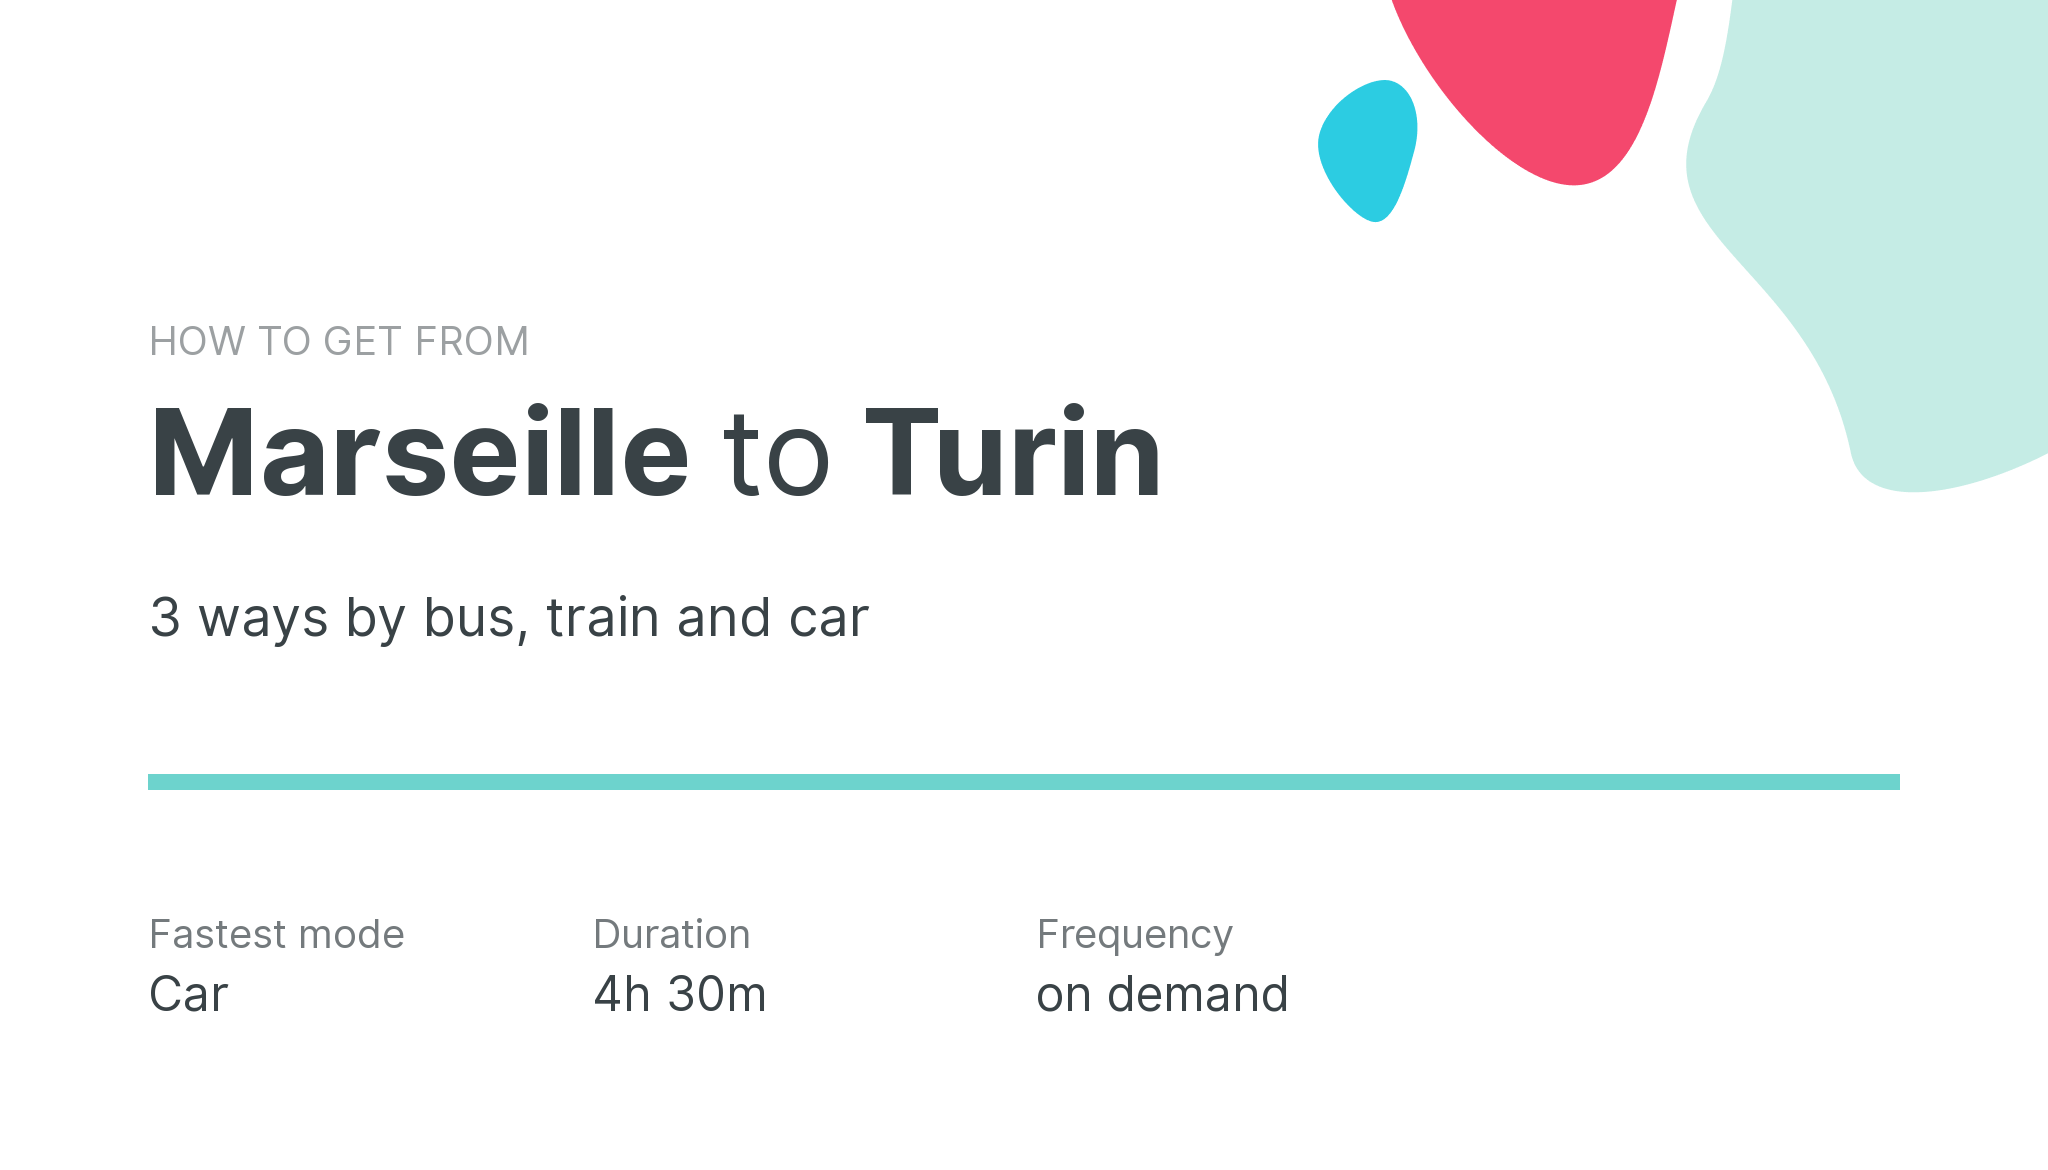 How do I get from Marseille to Turin